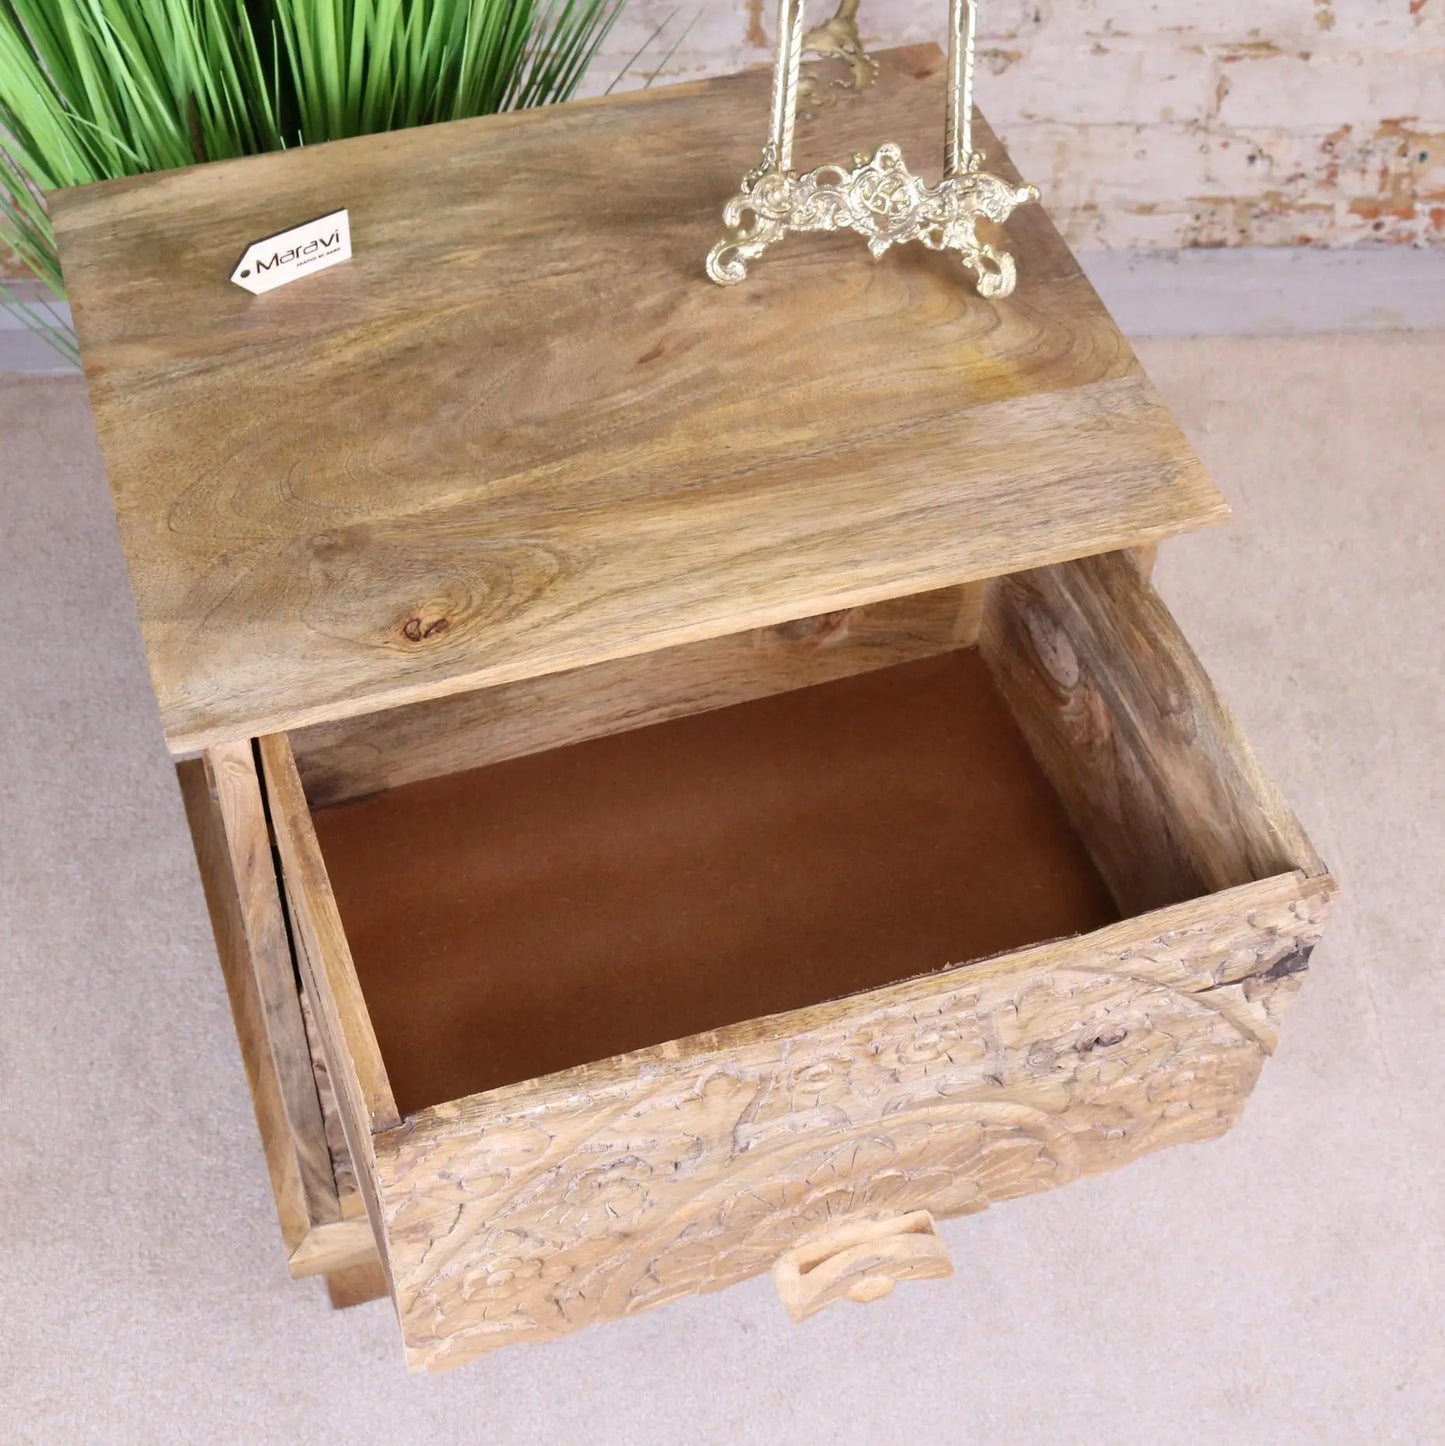 Ladha Mango Wood Carved Bedside Cabinet Drawer Open Top View